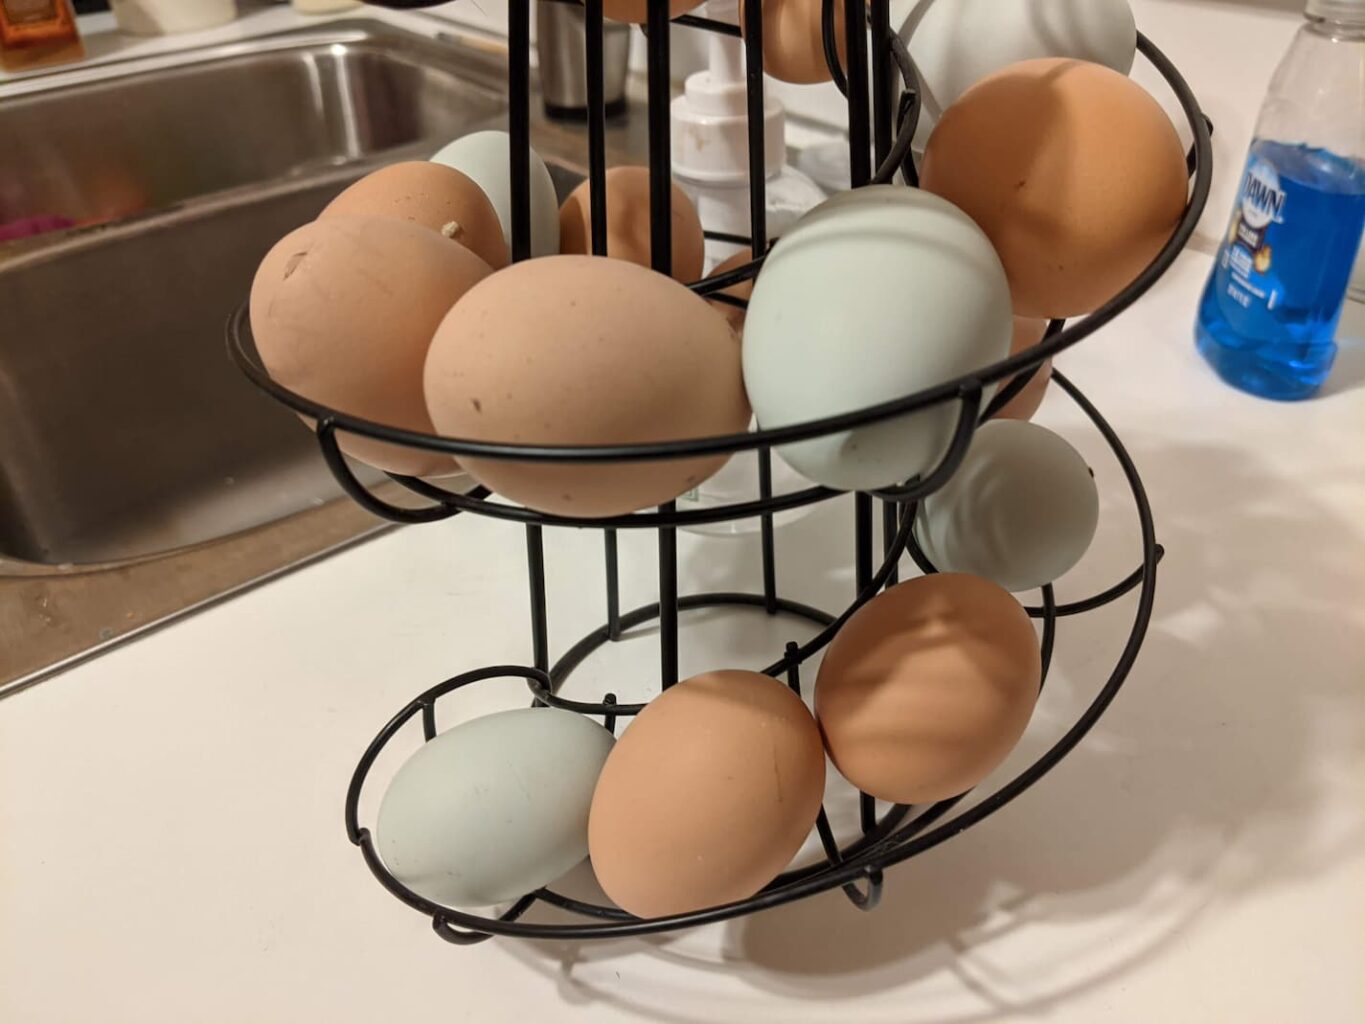 An image of fresh eggs lined up spirally in my kitchen counter egg station.